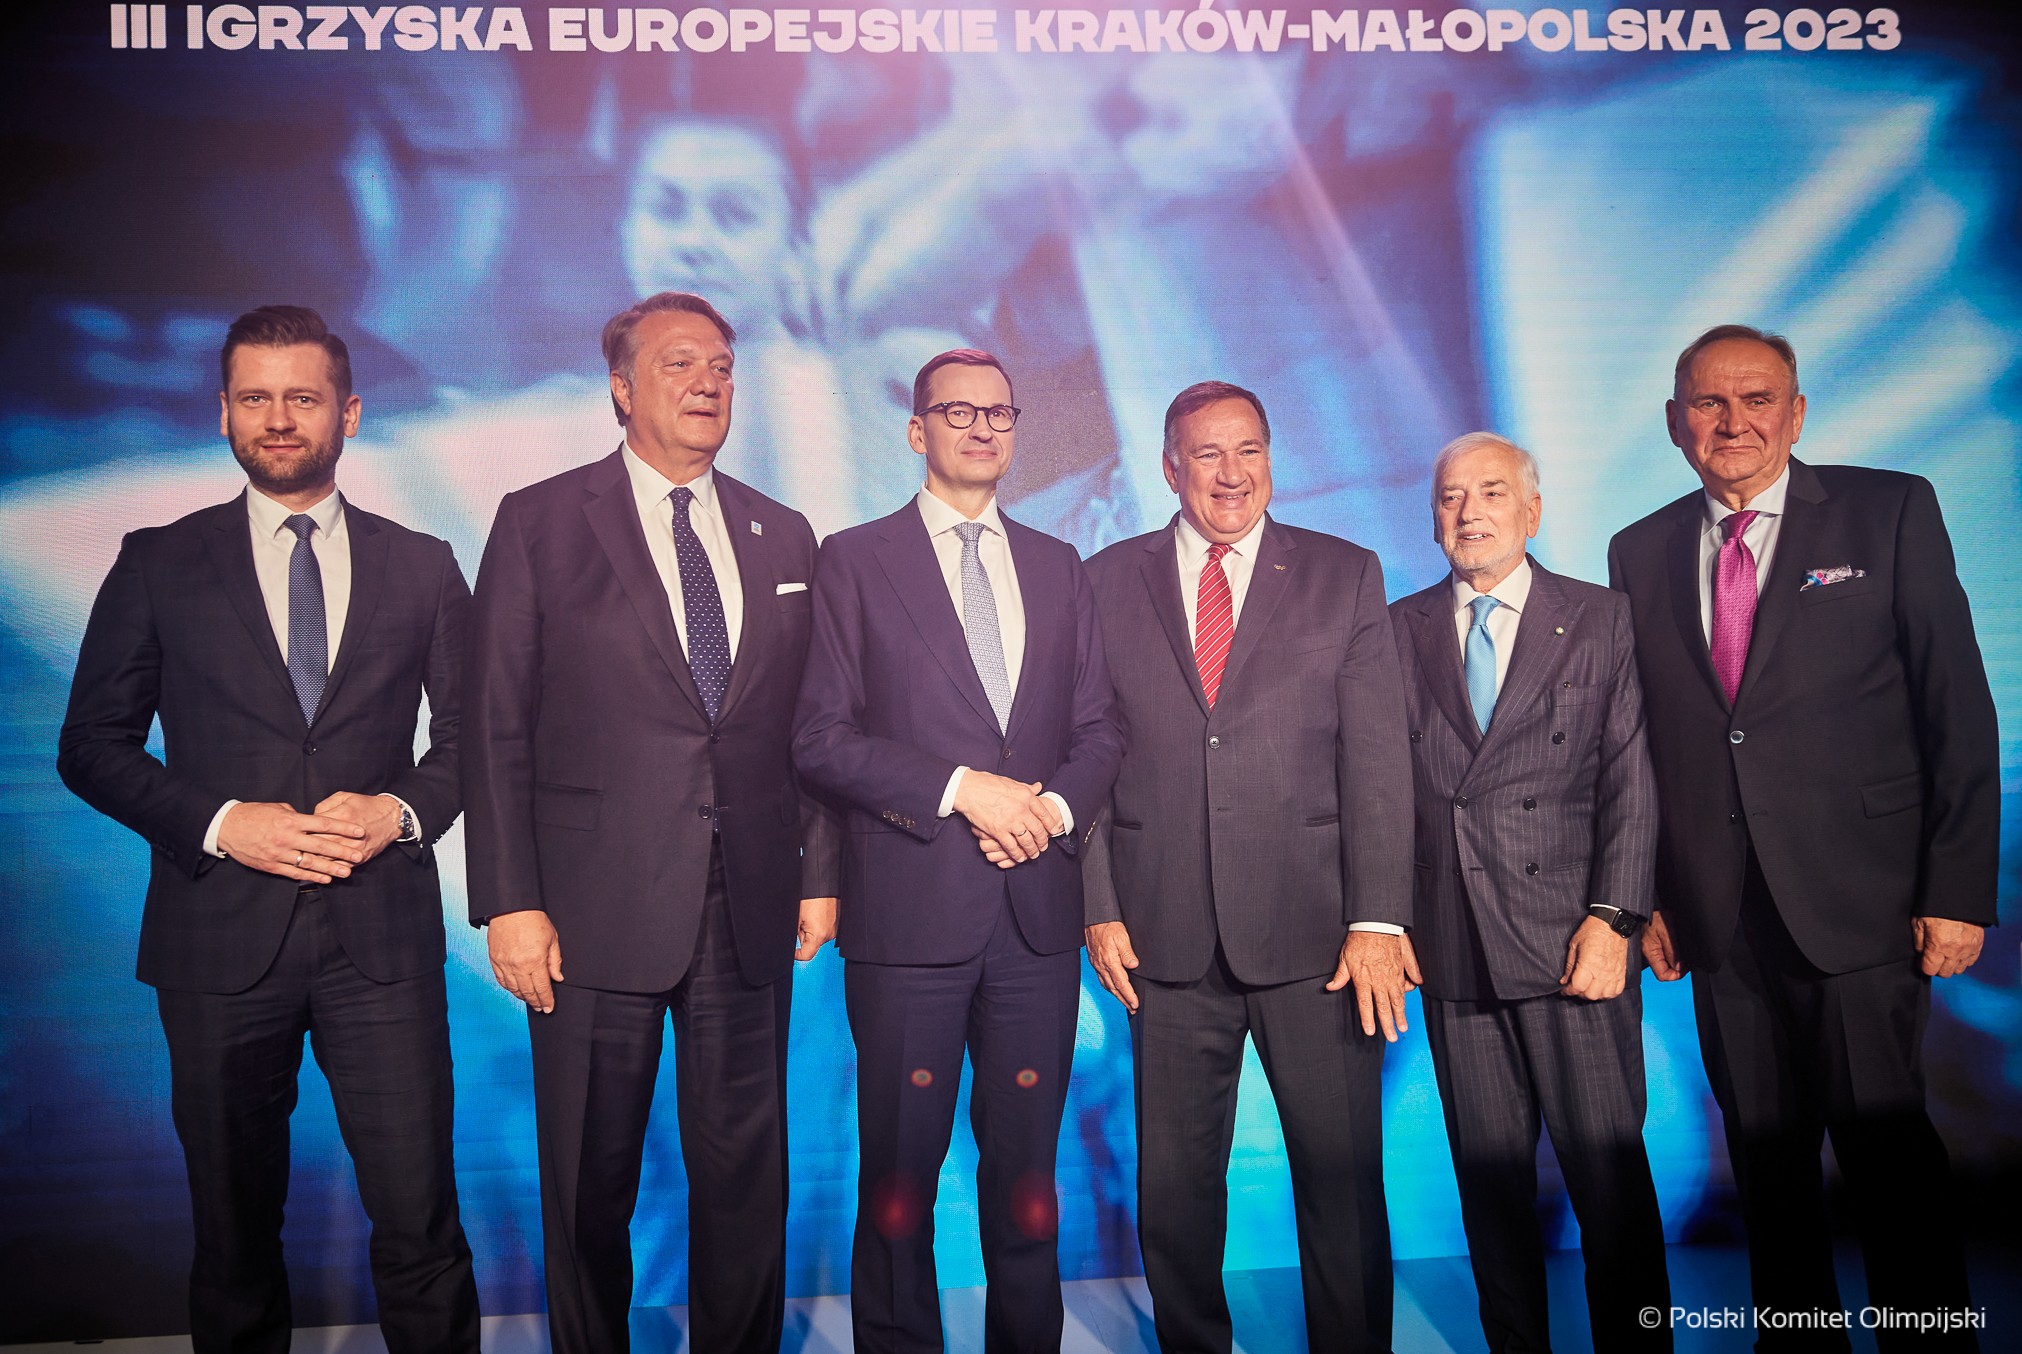 European Games 2023 to set “sustainable blueprint for the future” as Host City Region Contract signed in Warsaw